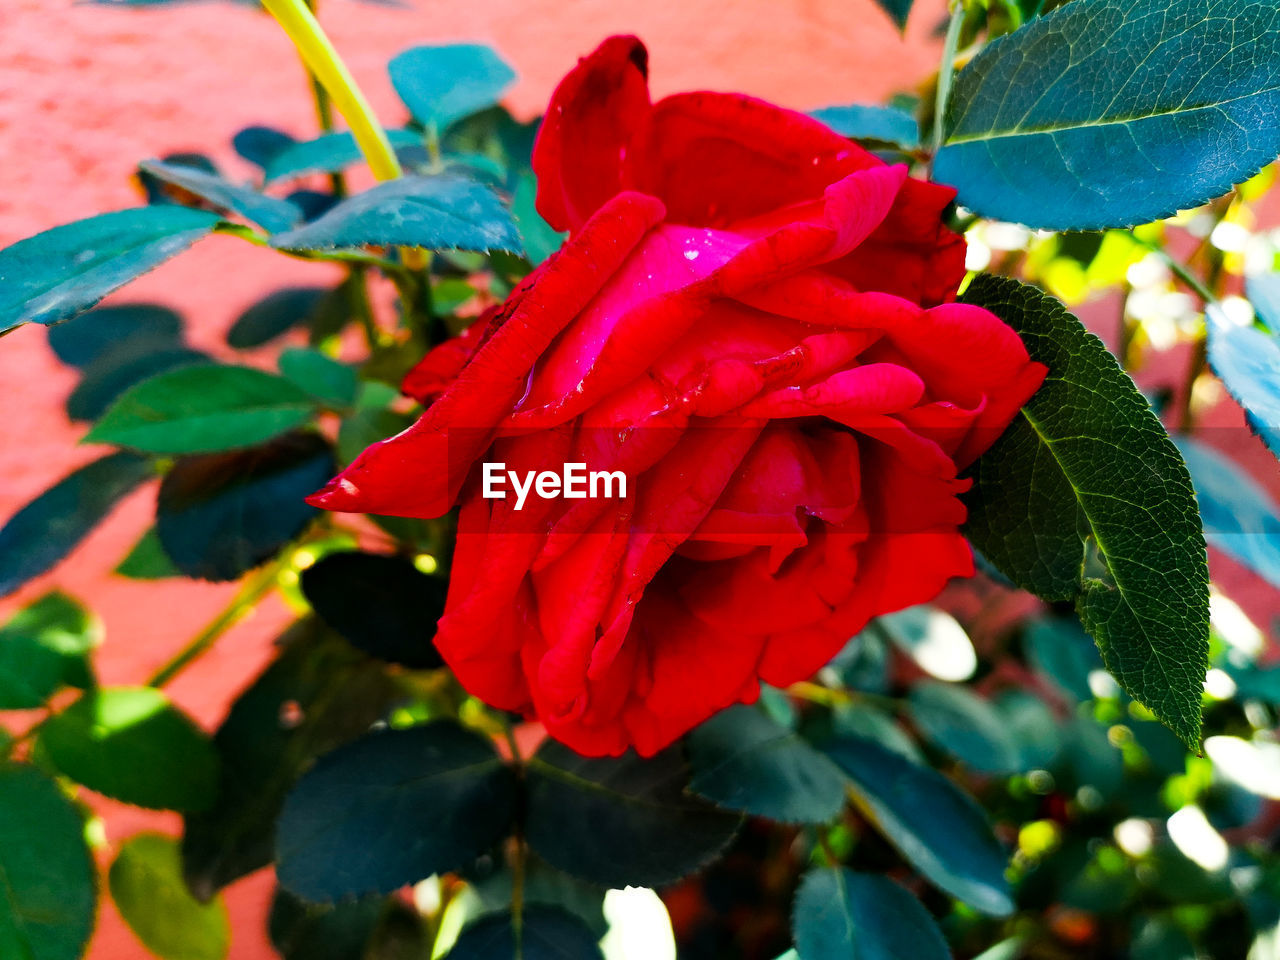 CLOSE-UP OF RED ROSE FLOWER